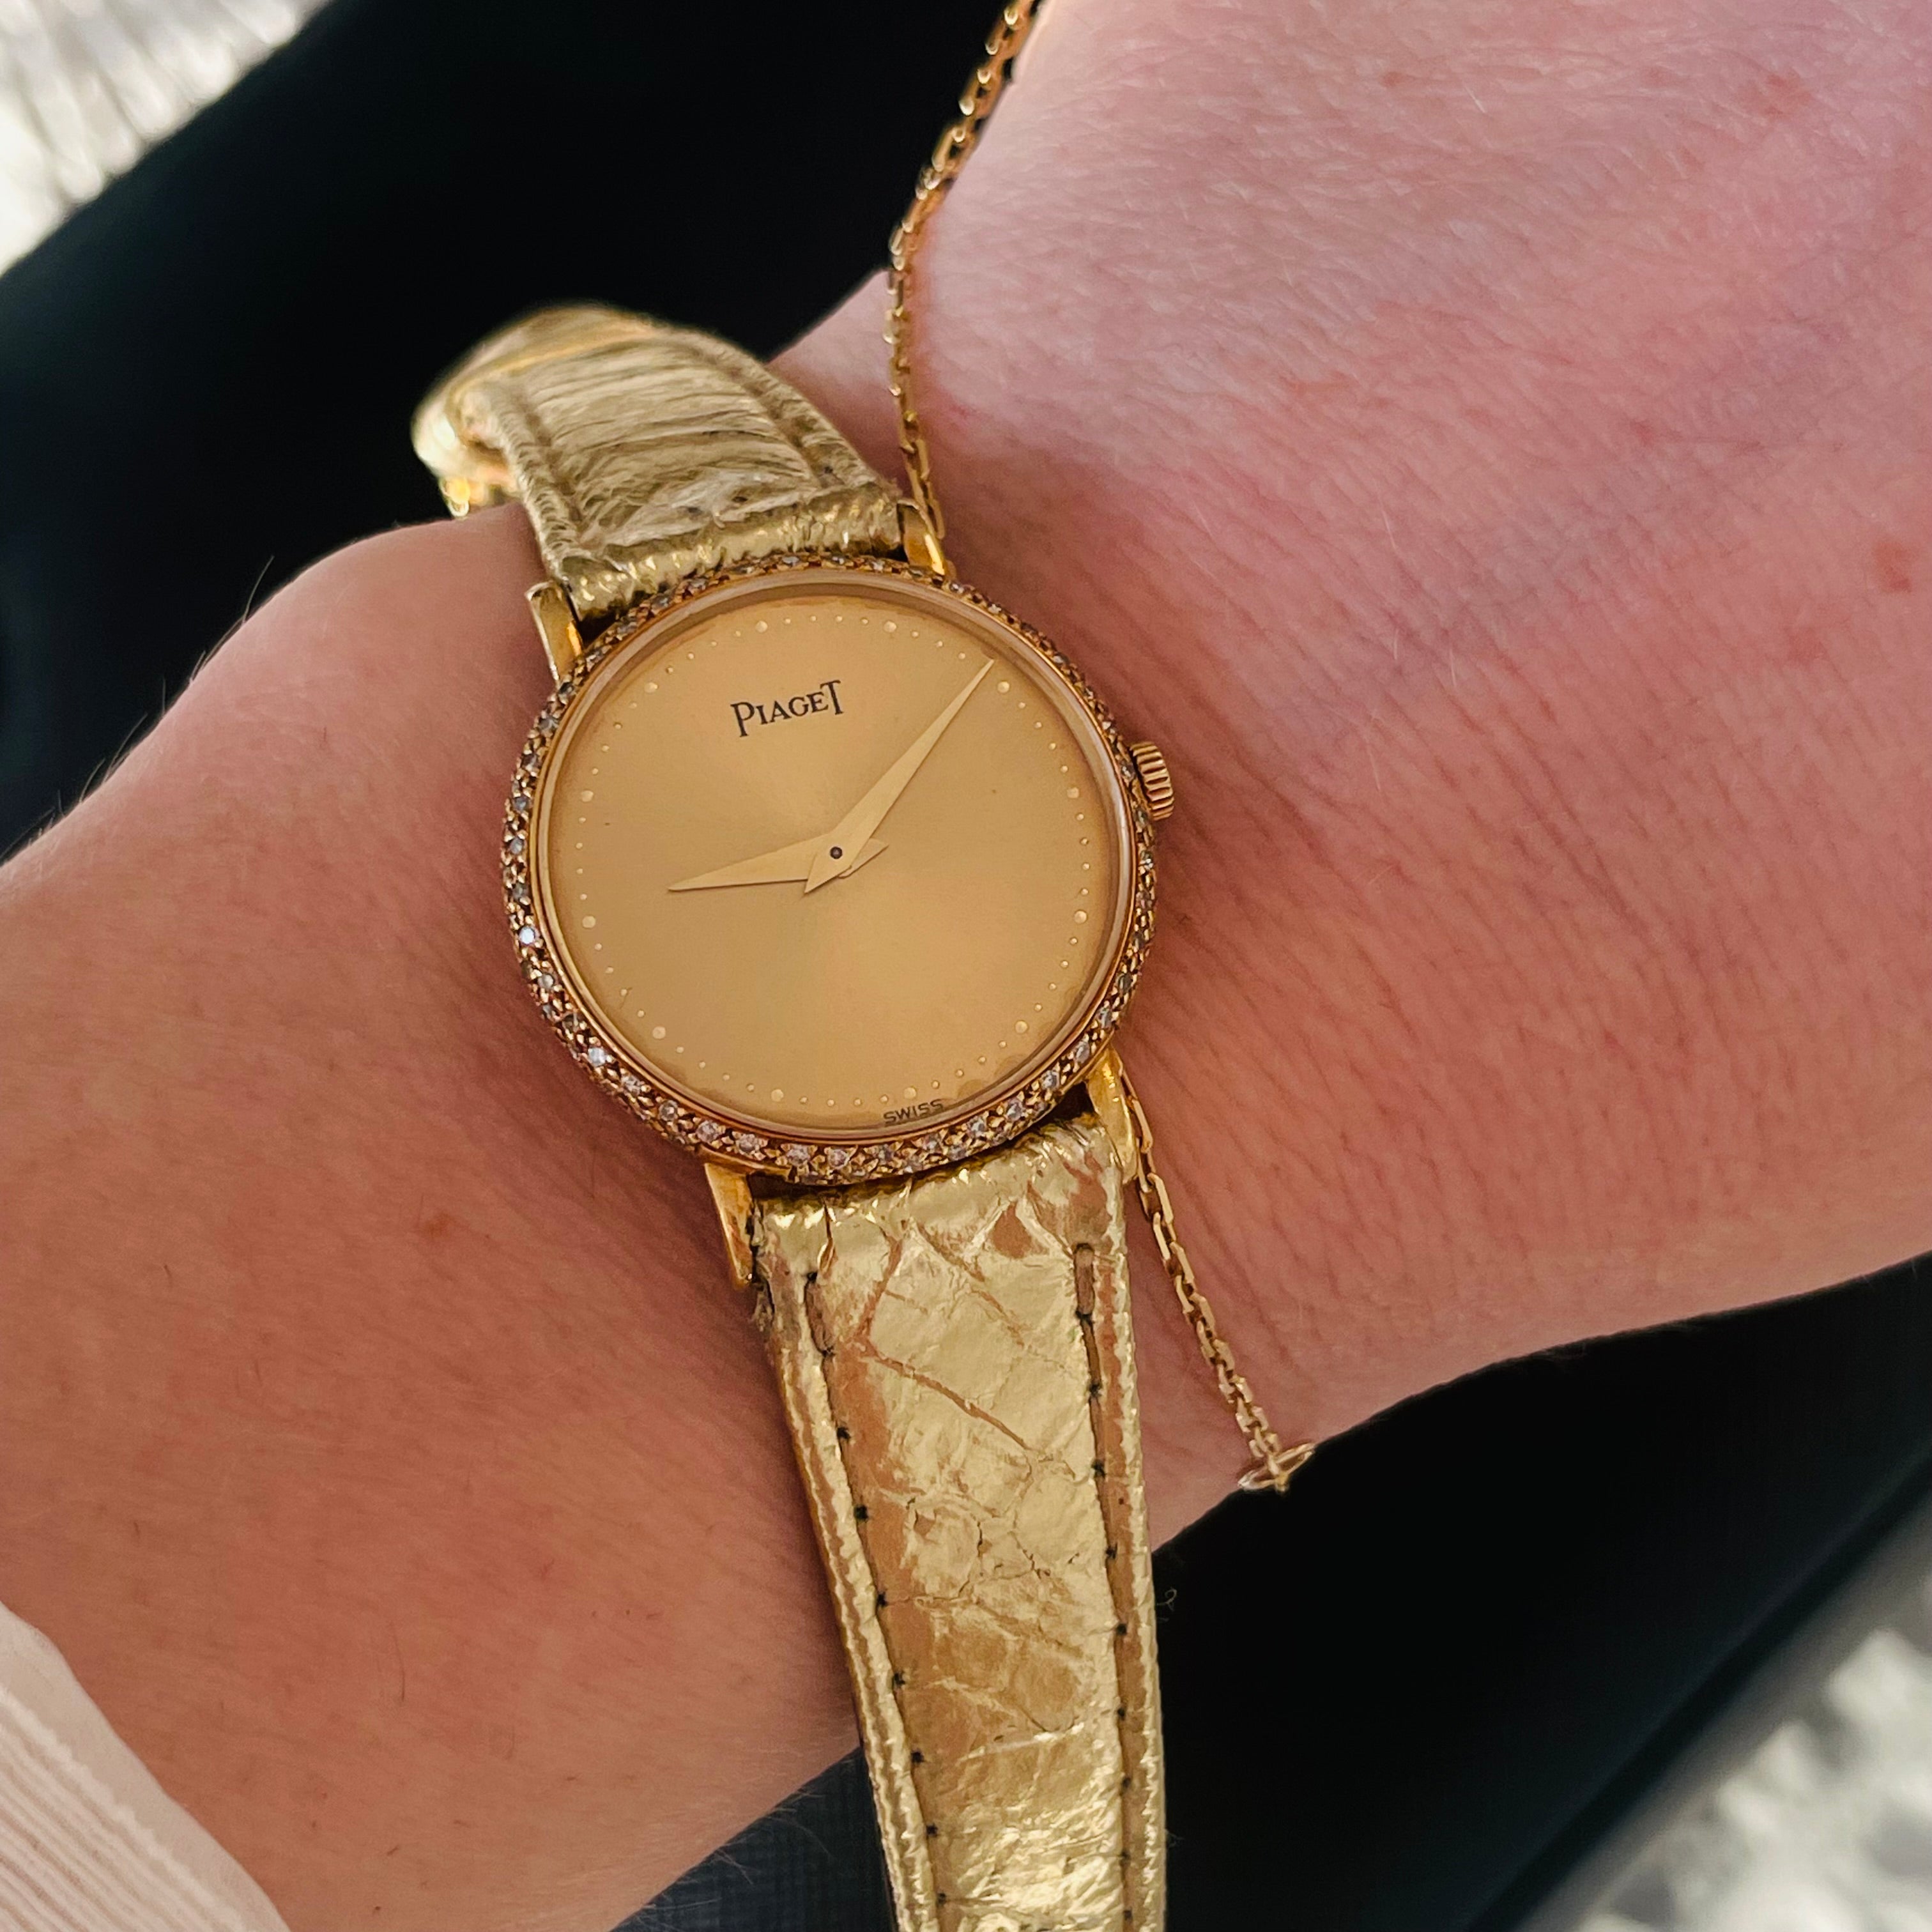 21mm Ladies Piaget 18K Yellow Gold Watch with Gold Strap